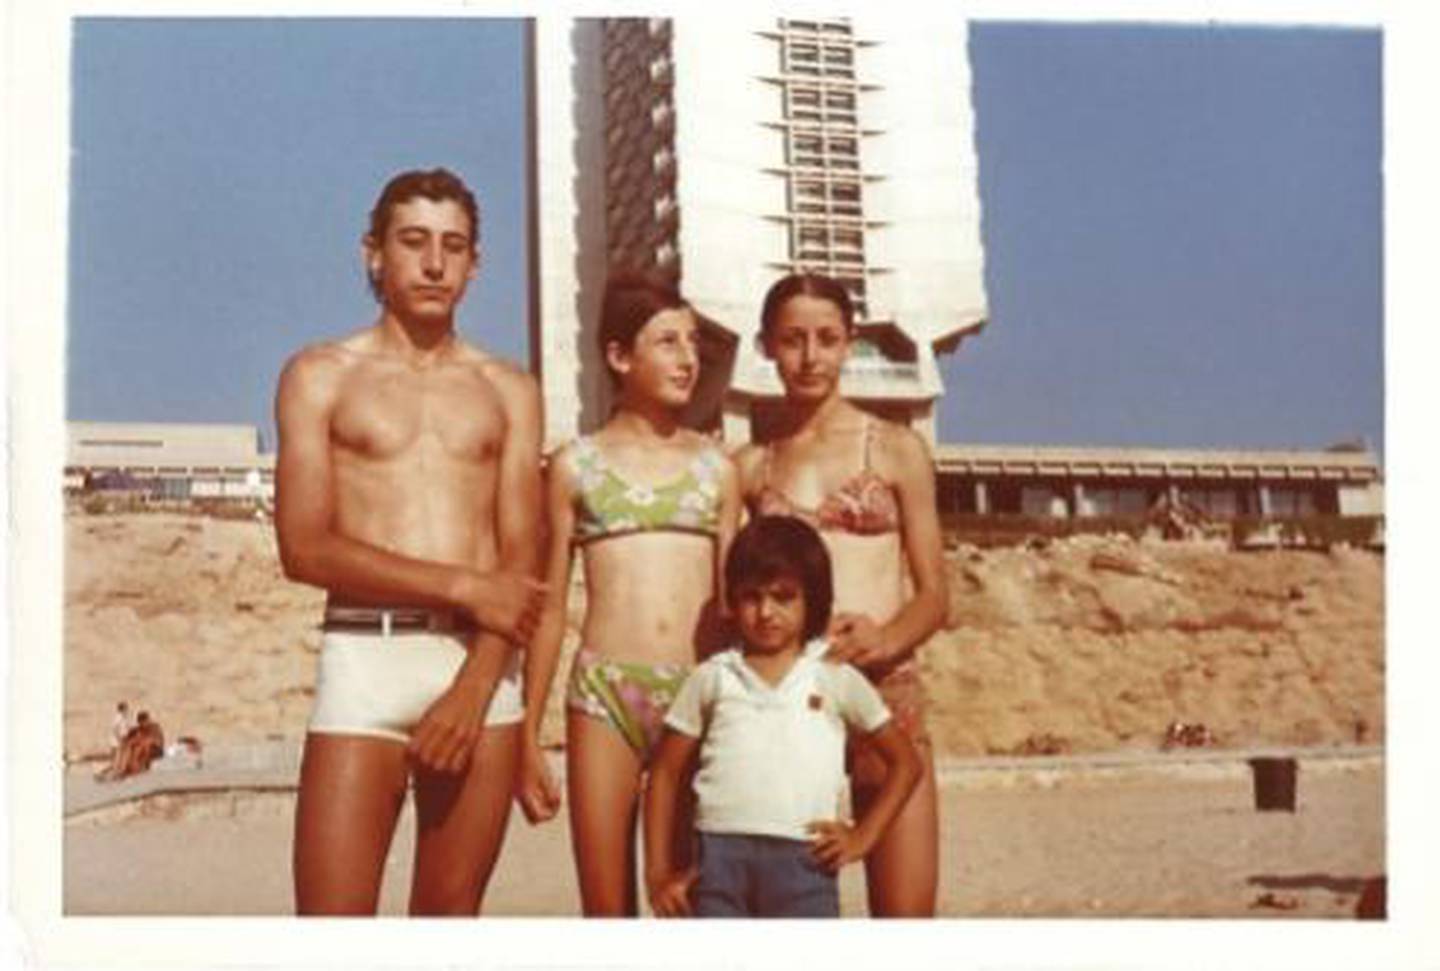 A Palestinian family in Jaffa in the 1970s. Bayan Dahdah / Middle East Archive Project